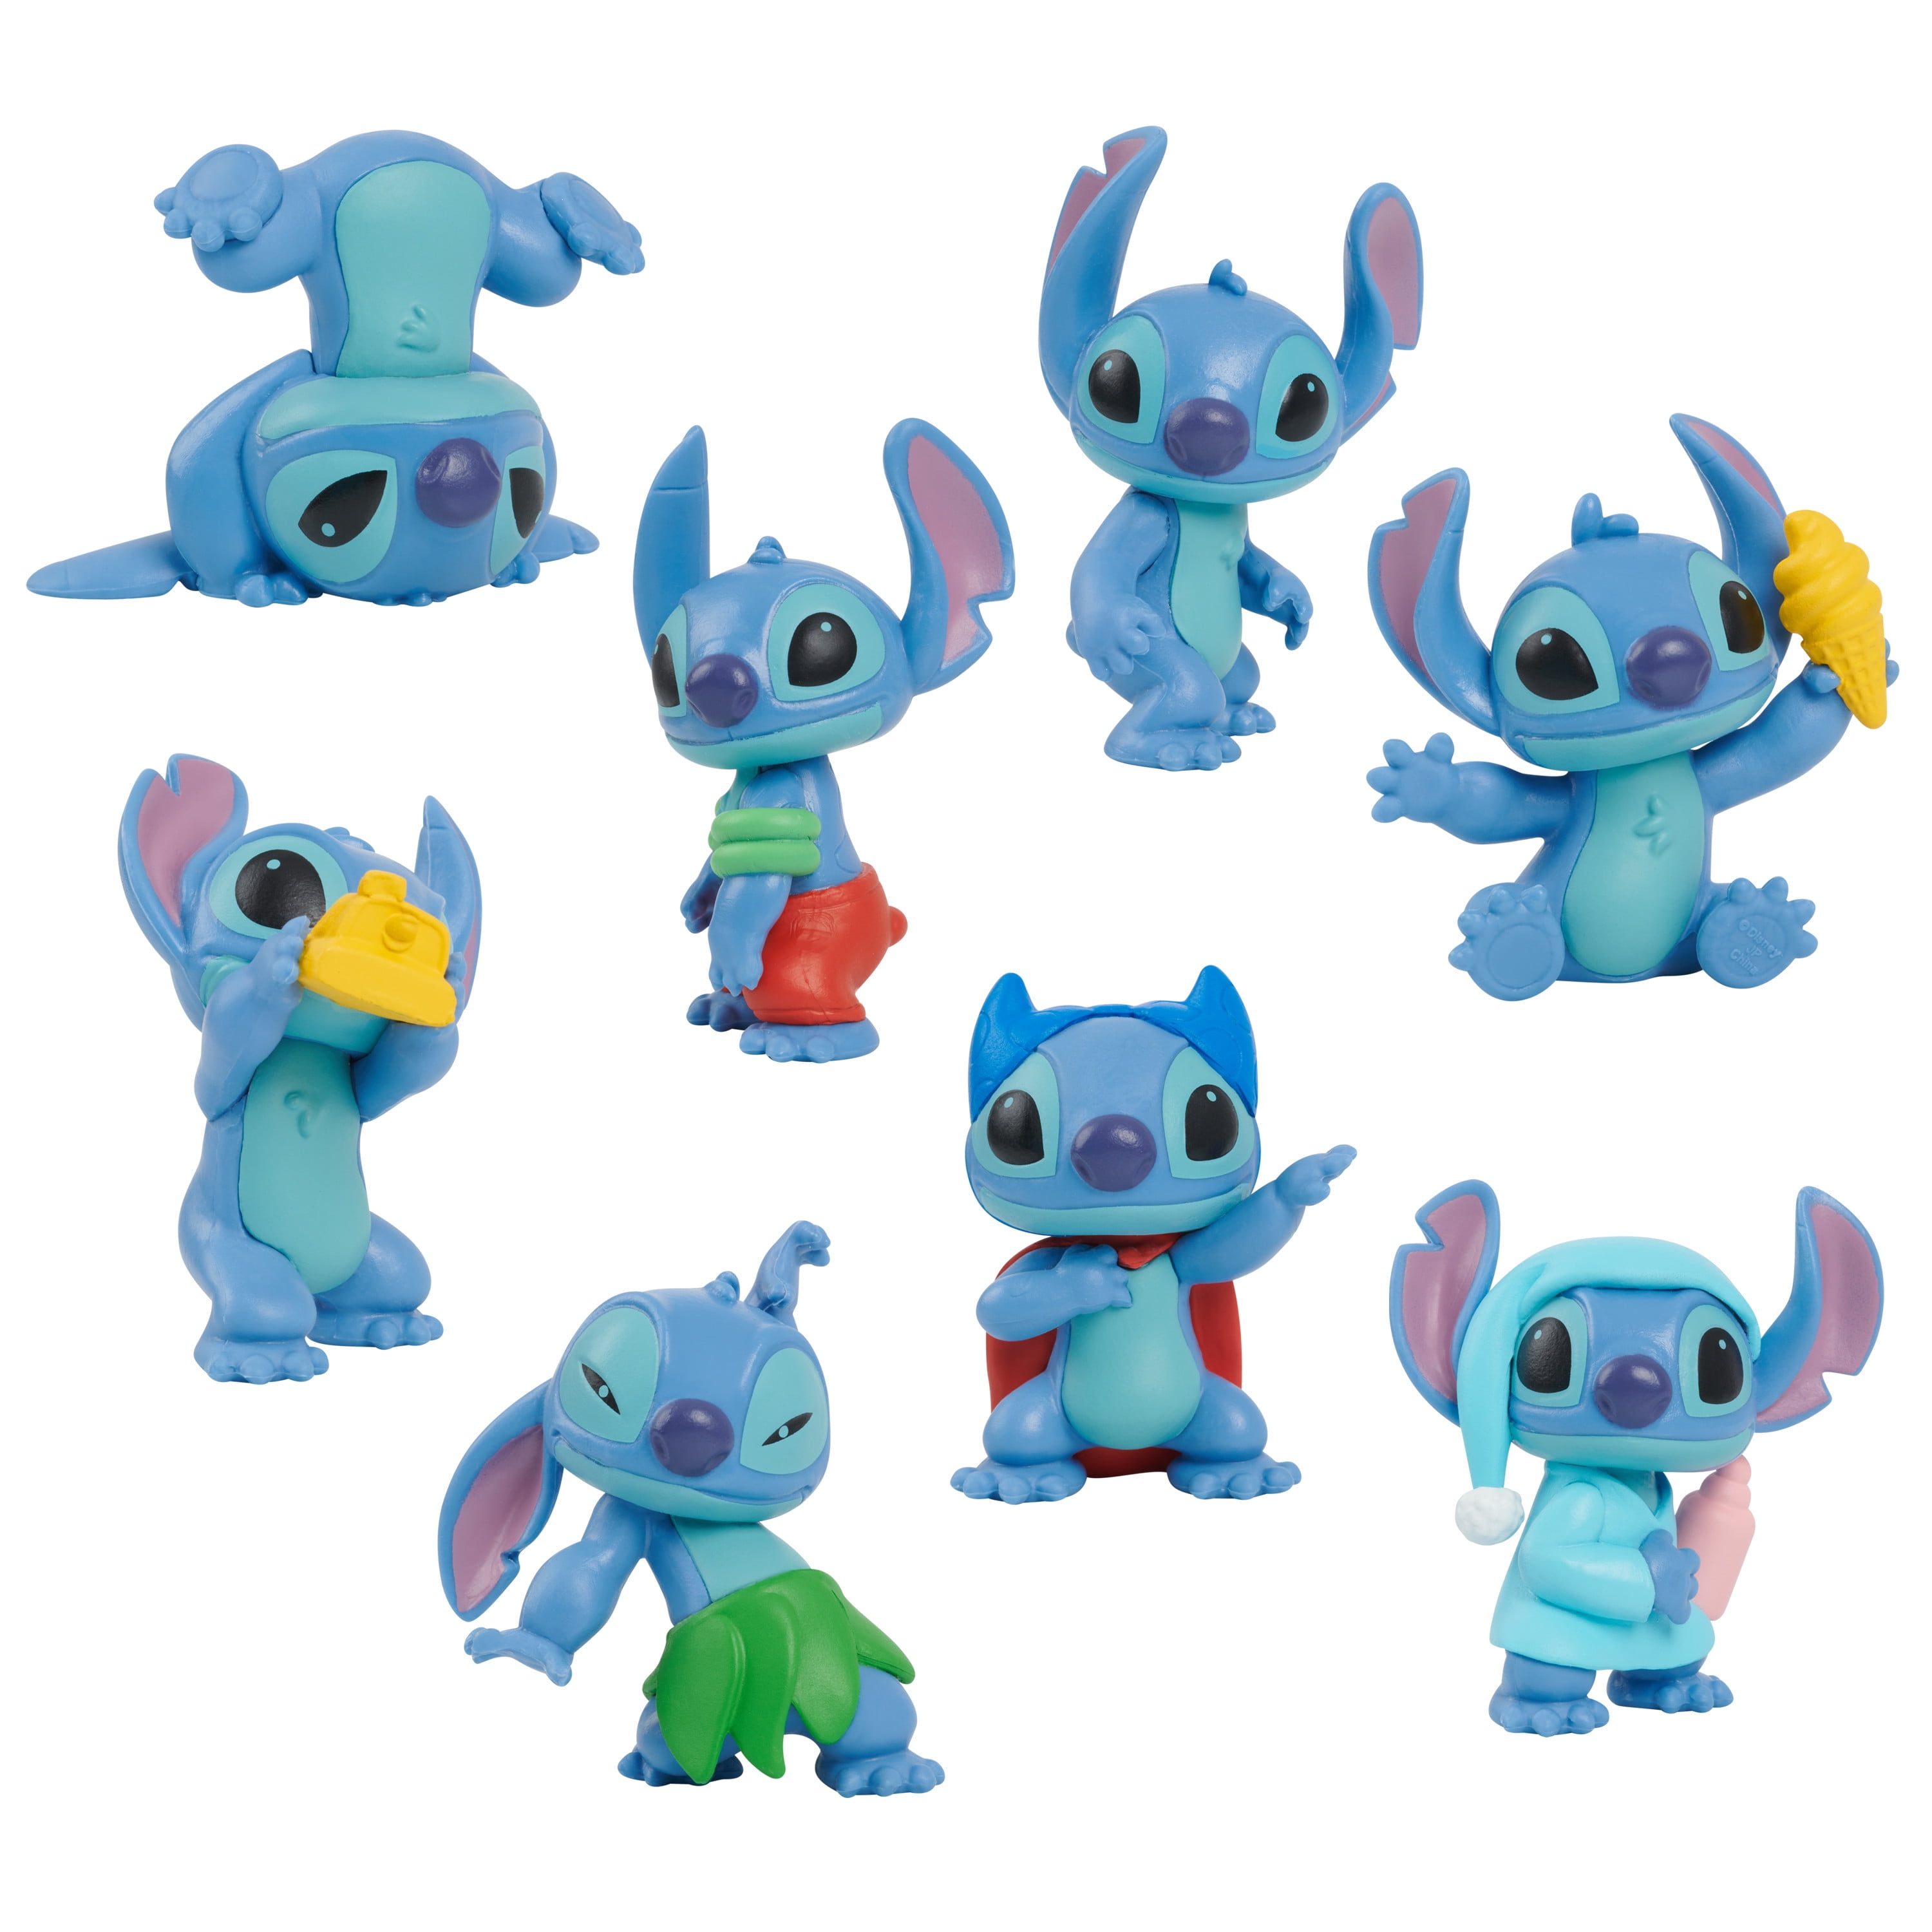 Disney’s Lilo & Stitch Collectible Friends Set, 8-Piece Figure Set,  Officially Licensed Kids Toys for Ages 3 Up, Gifts and Presents